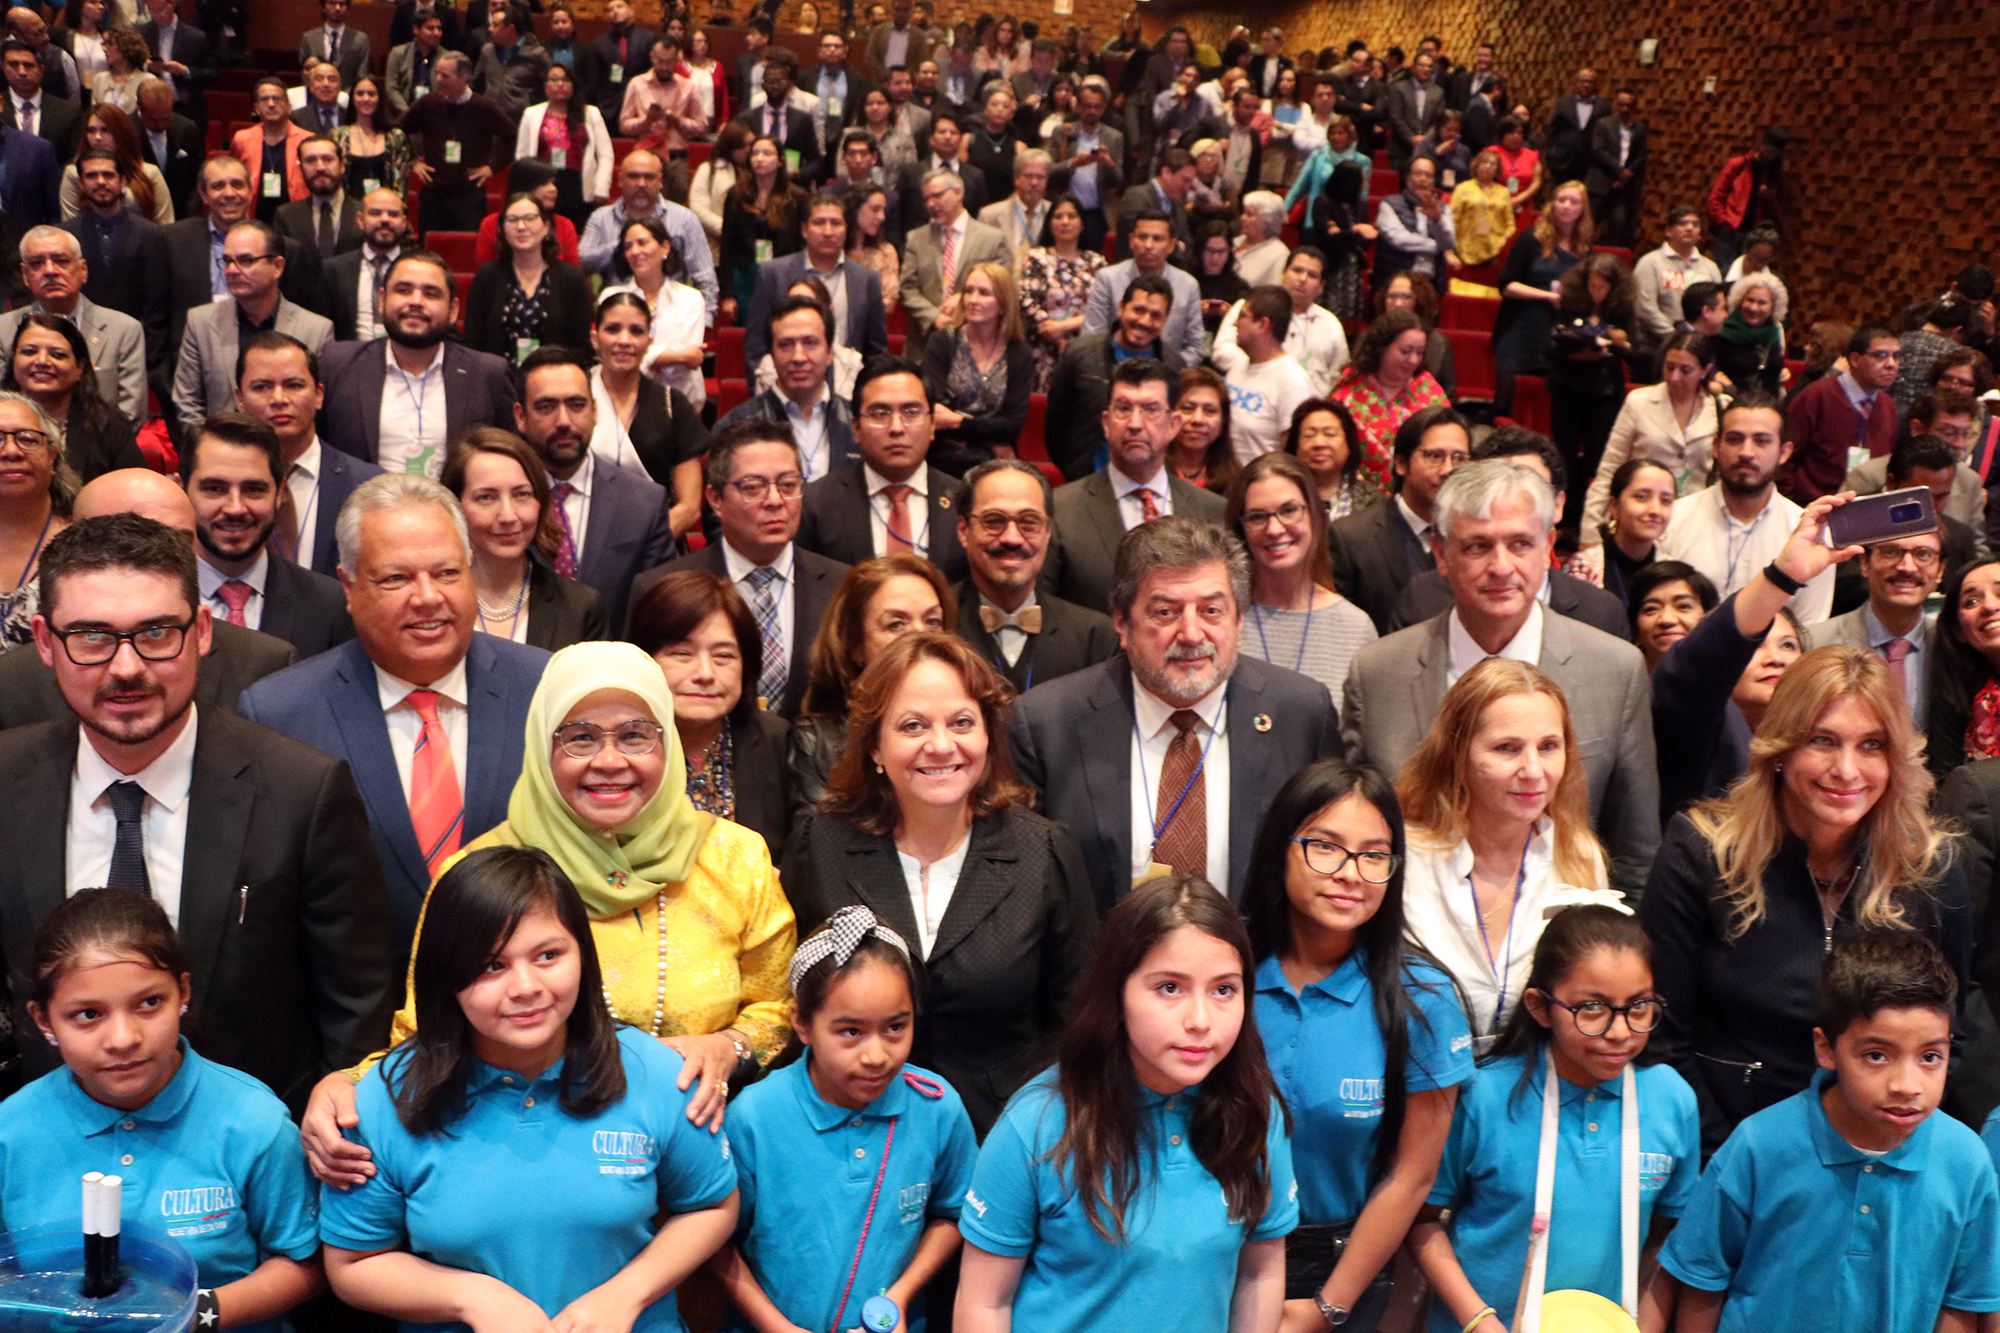 A group photo of World Habitat Day in Mexico City.